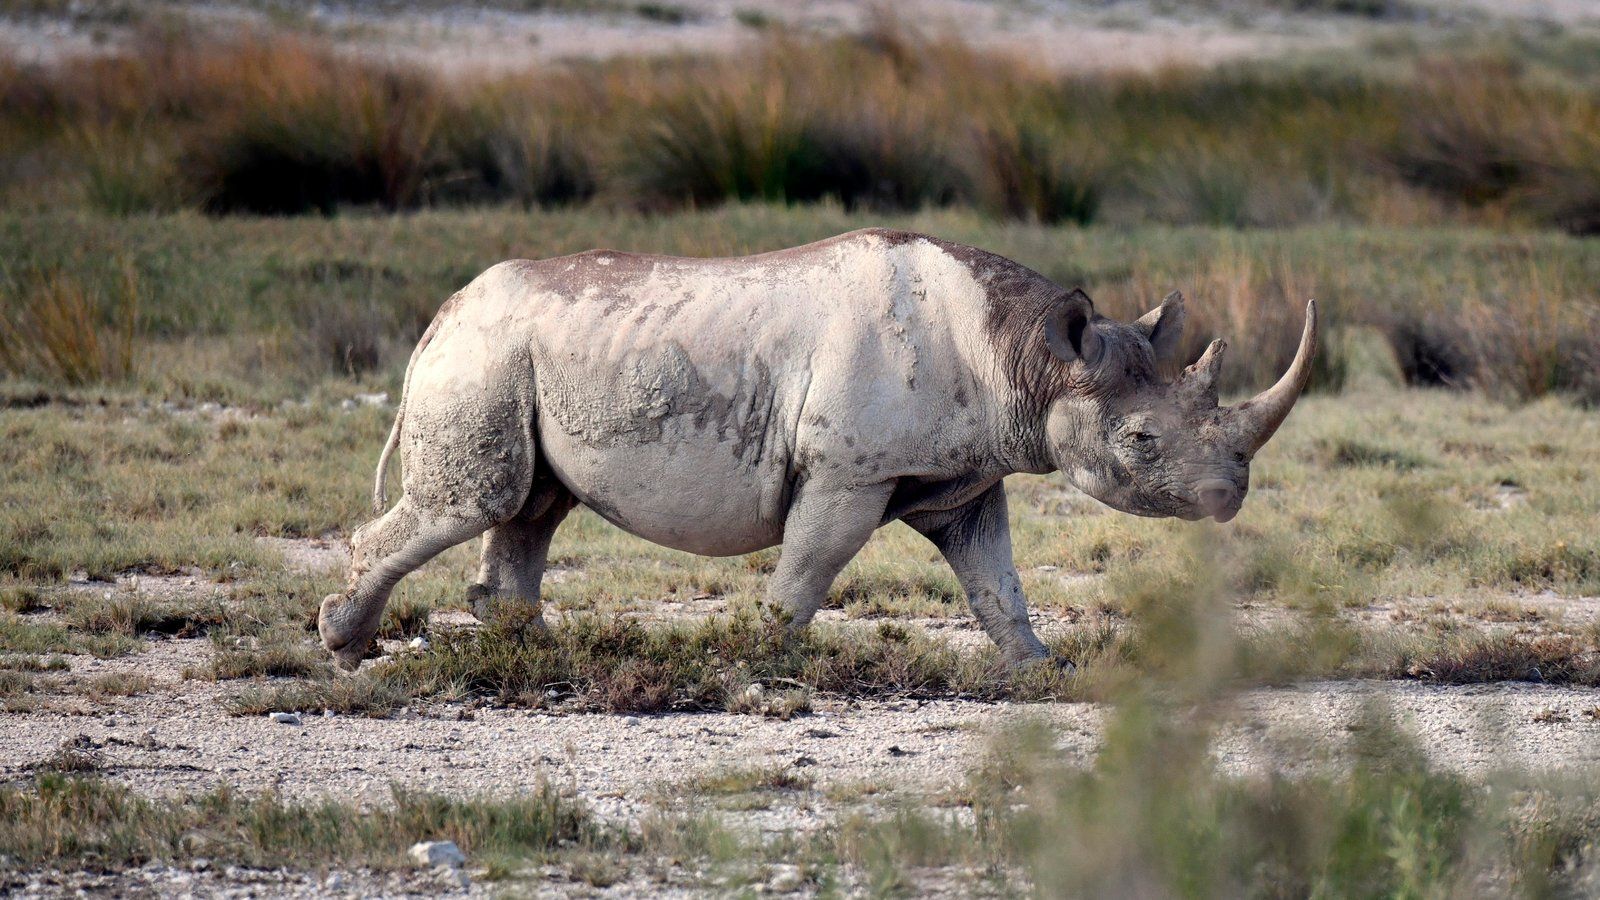 Trophy Hunter Seeks to Import Parts of Rare Rhino He Paid $000